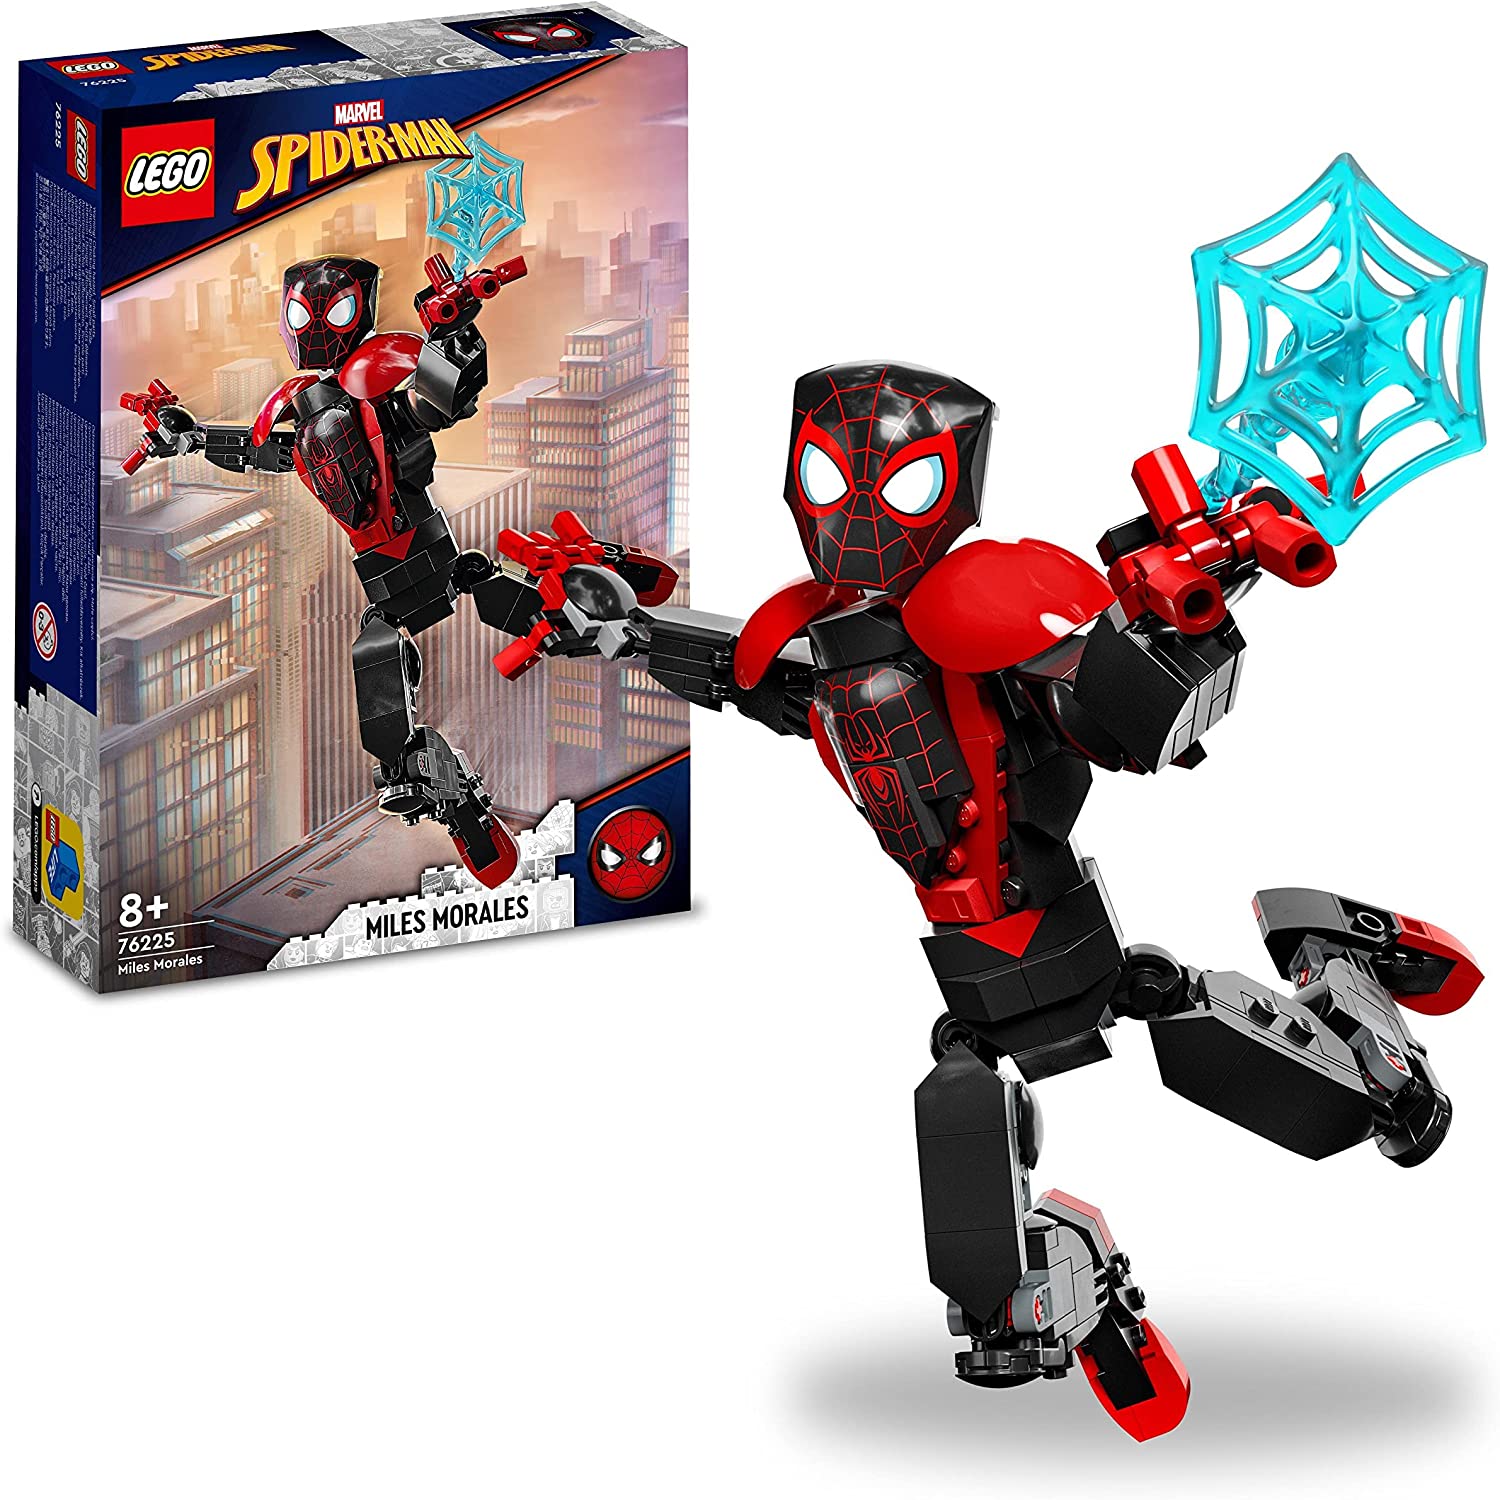 LEGO 76225 Marvel Miles Morales Figure, Fully Moving Action Toy, Collectable Spider-Man Set, Toy for Boys and Girls